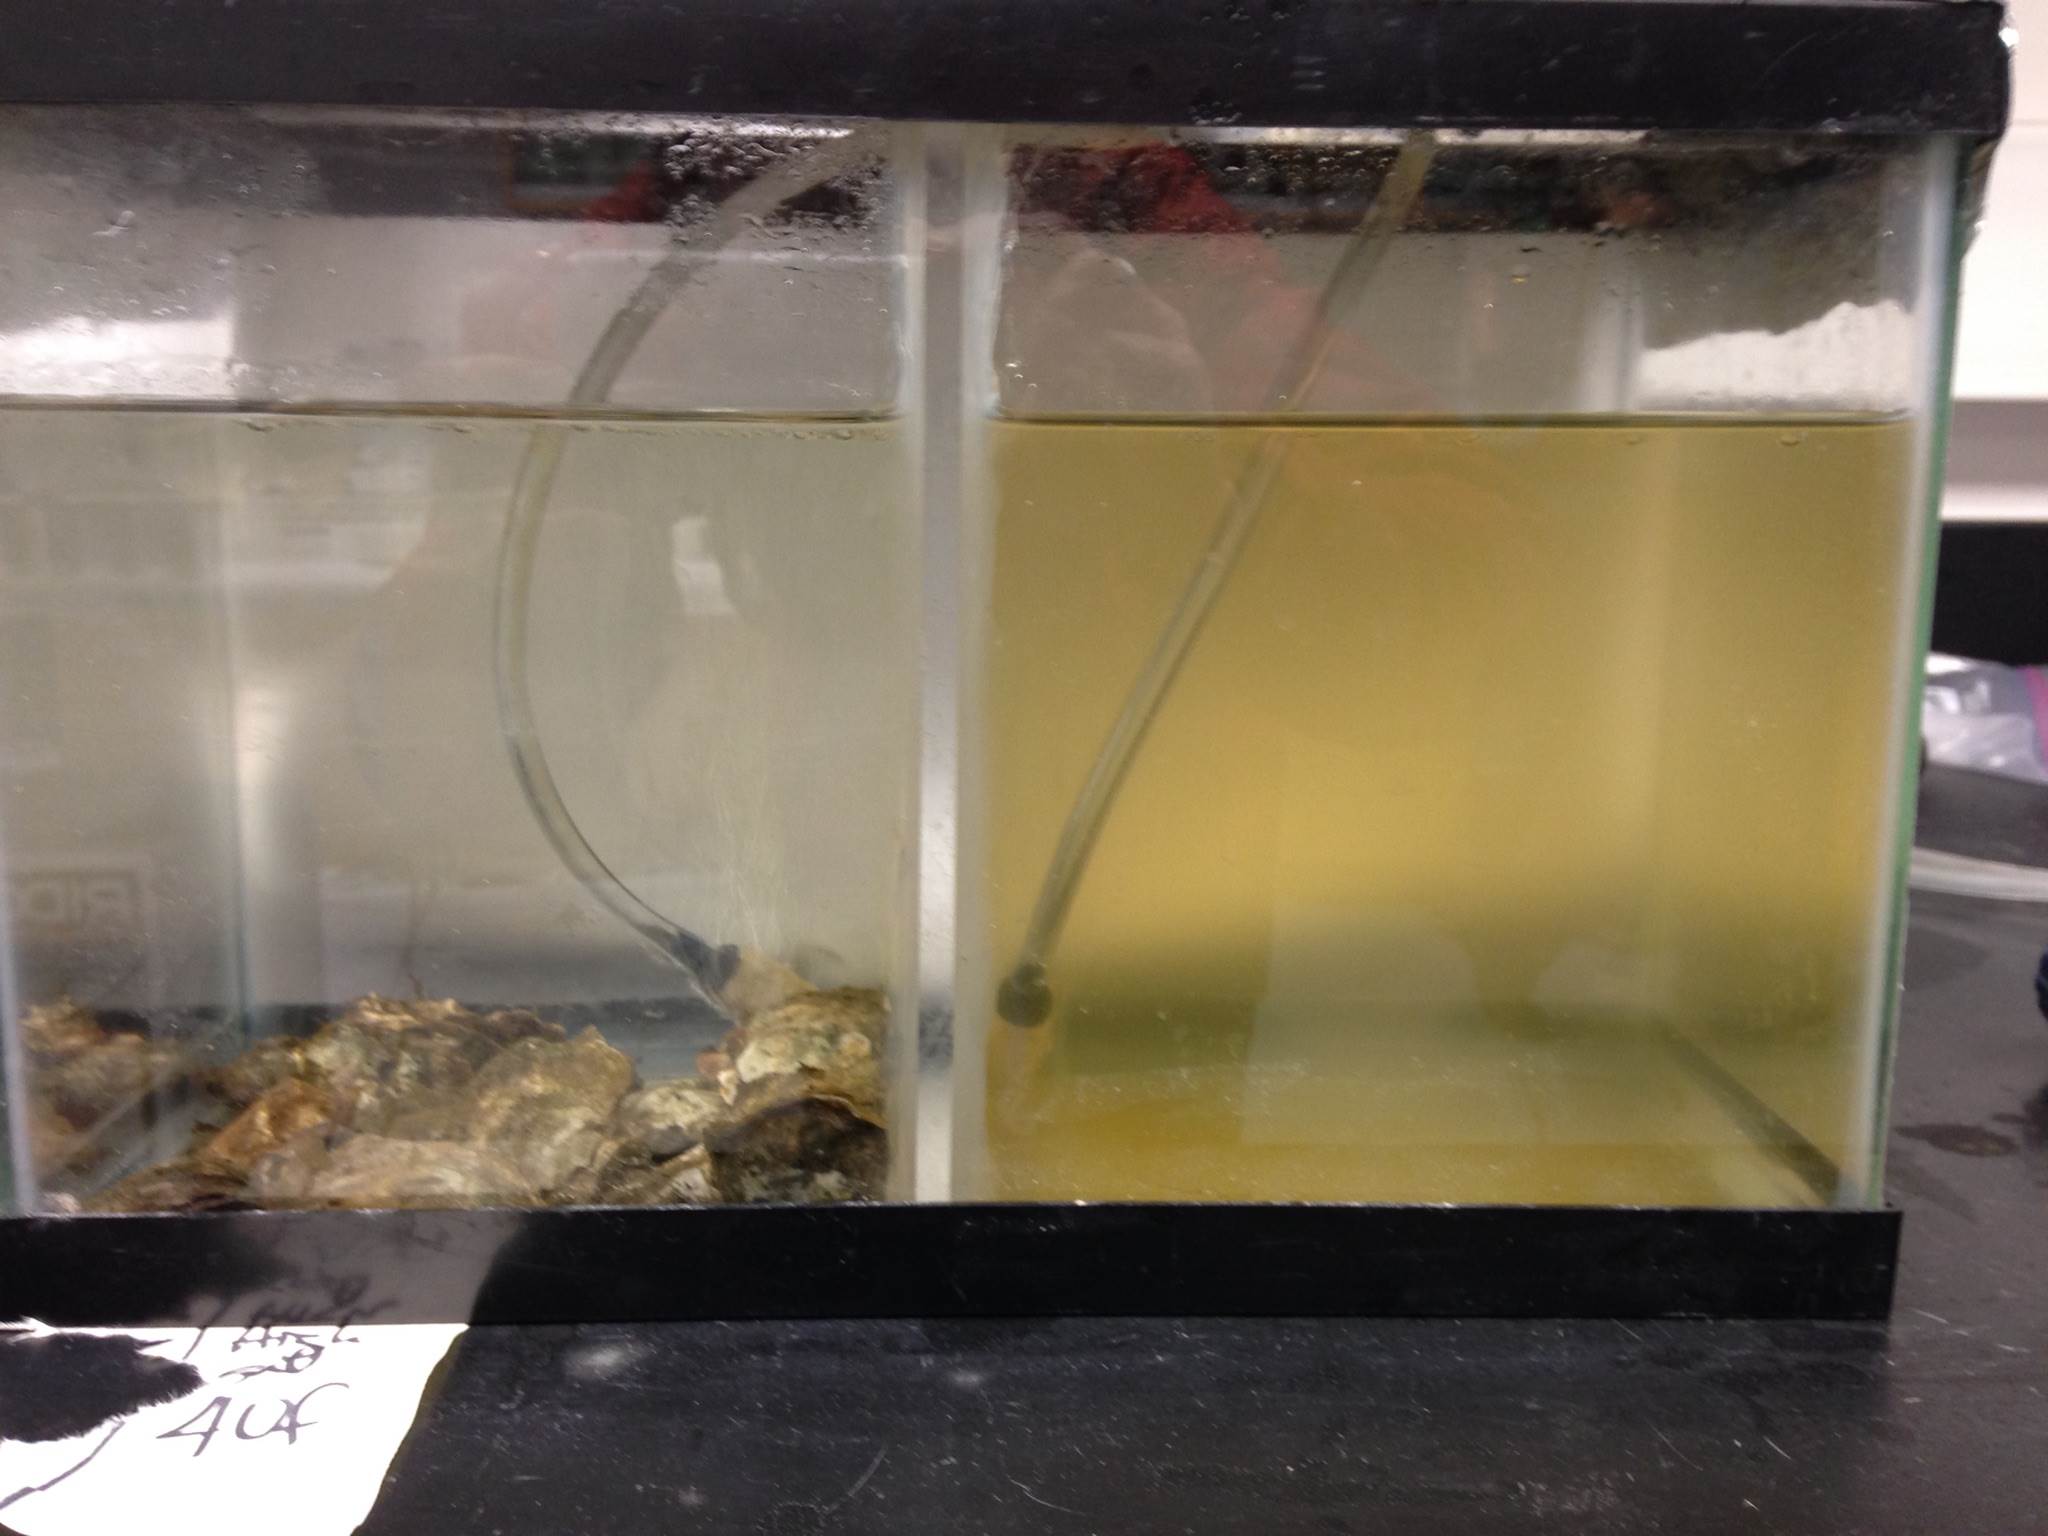 Two saltwater tanks, one with oysters and one without, demonstrating that oysters are good filter feeders.